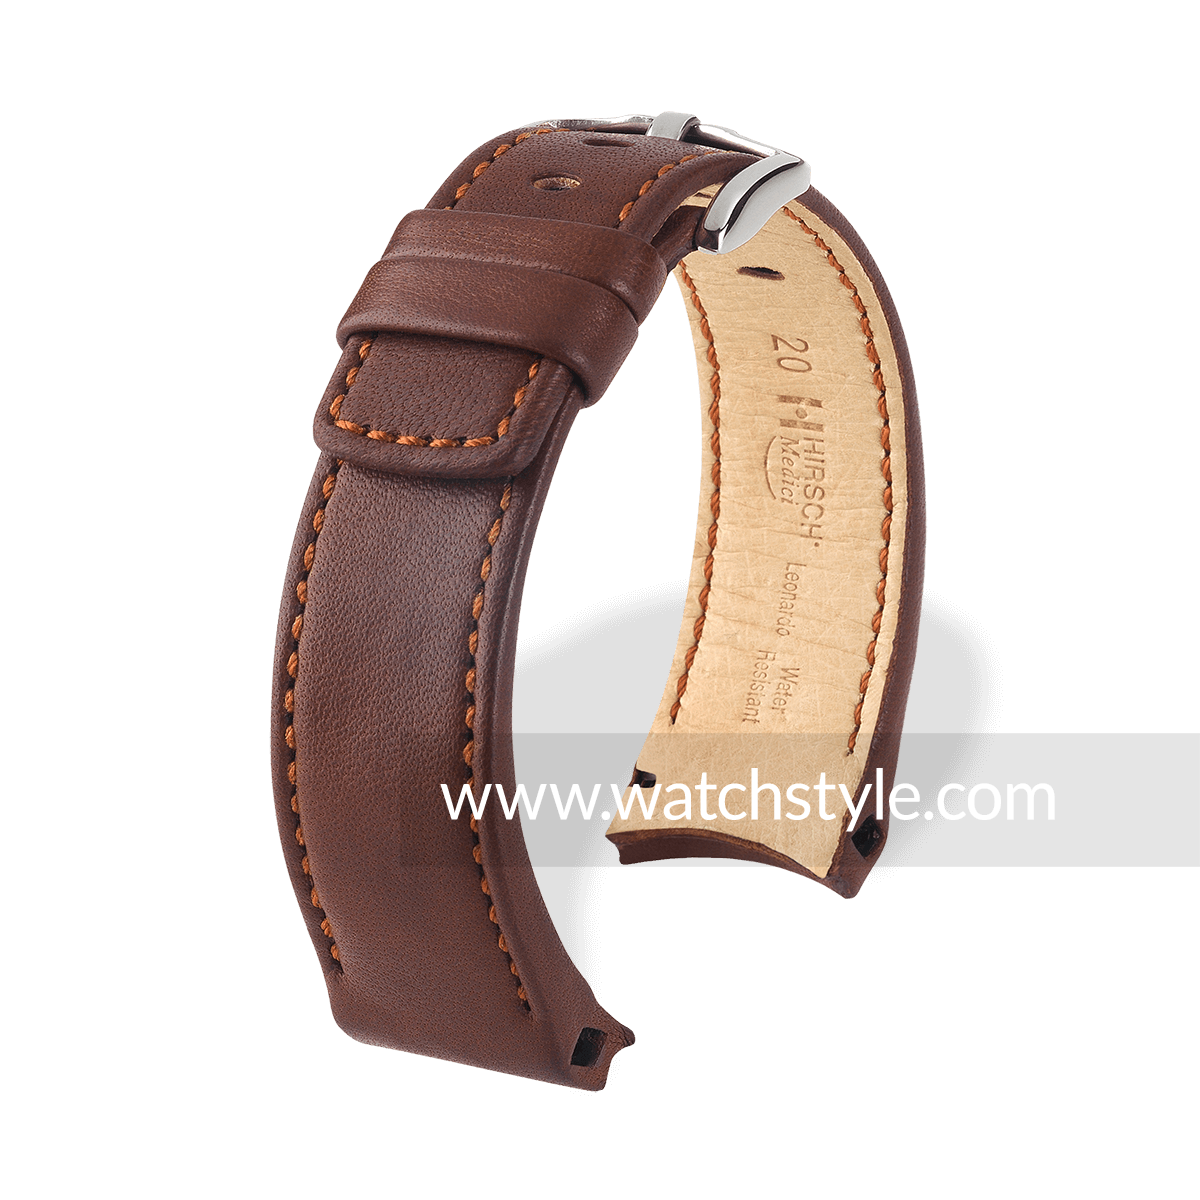 22MM SMOOTH LEATHER STRAP BAND DEPLOYMENT BUCKLE FOR GIRARD PERREGAUX L/BROWN 